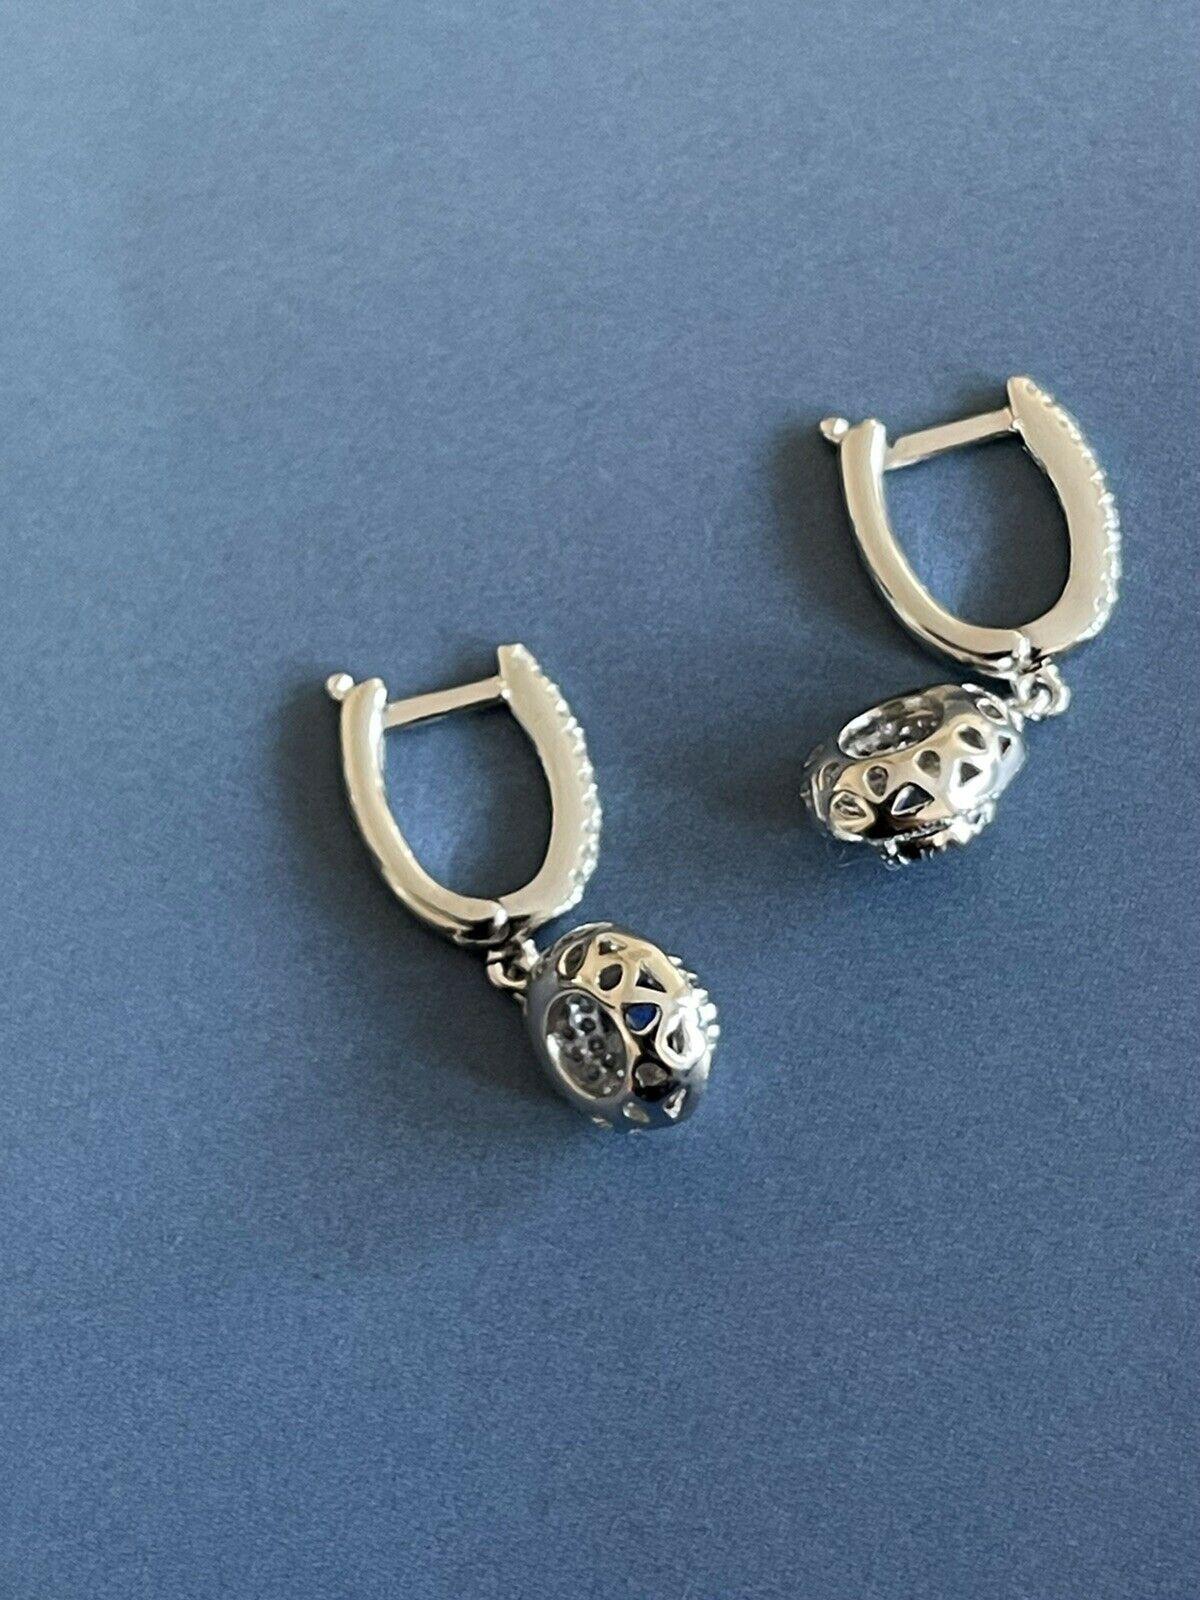 

Sapphire and Diamonds, a Classic British fine jewellery favourite combination

Very elegant 14ct White gold diamond hoop earrings - hallmarked

It ll make perfect present for someone special or girls who want to treat themselves

0.60ct+